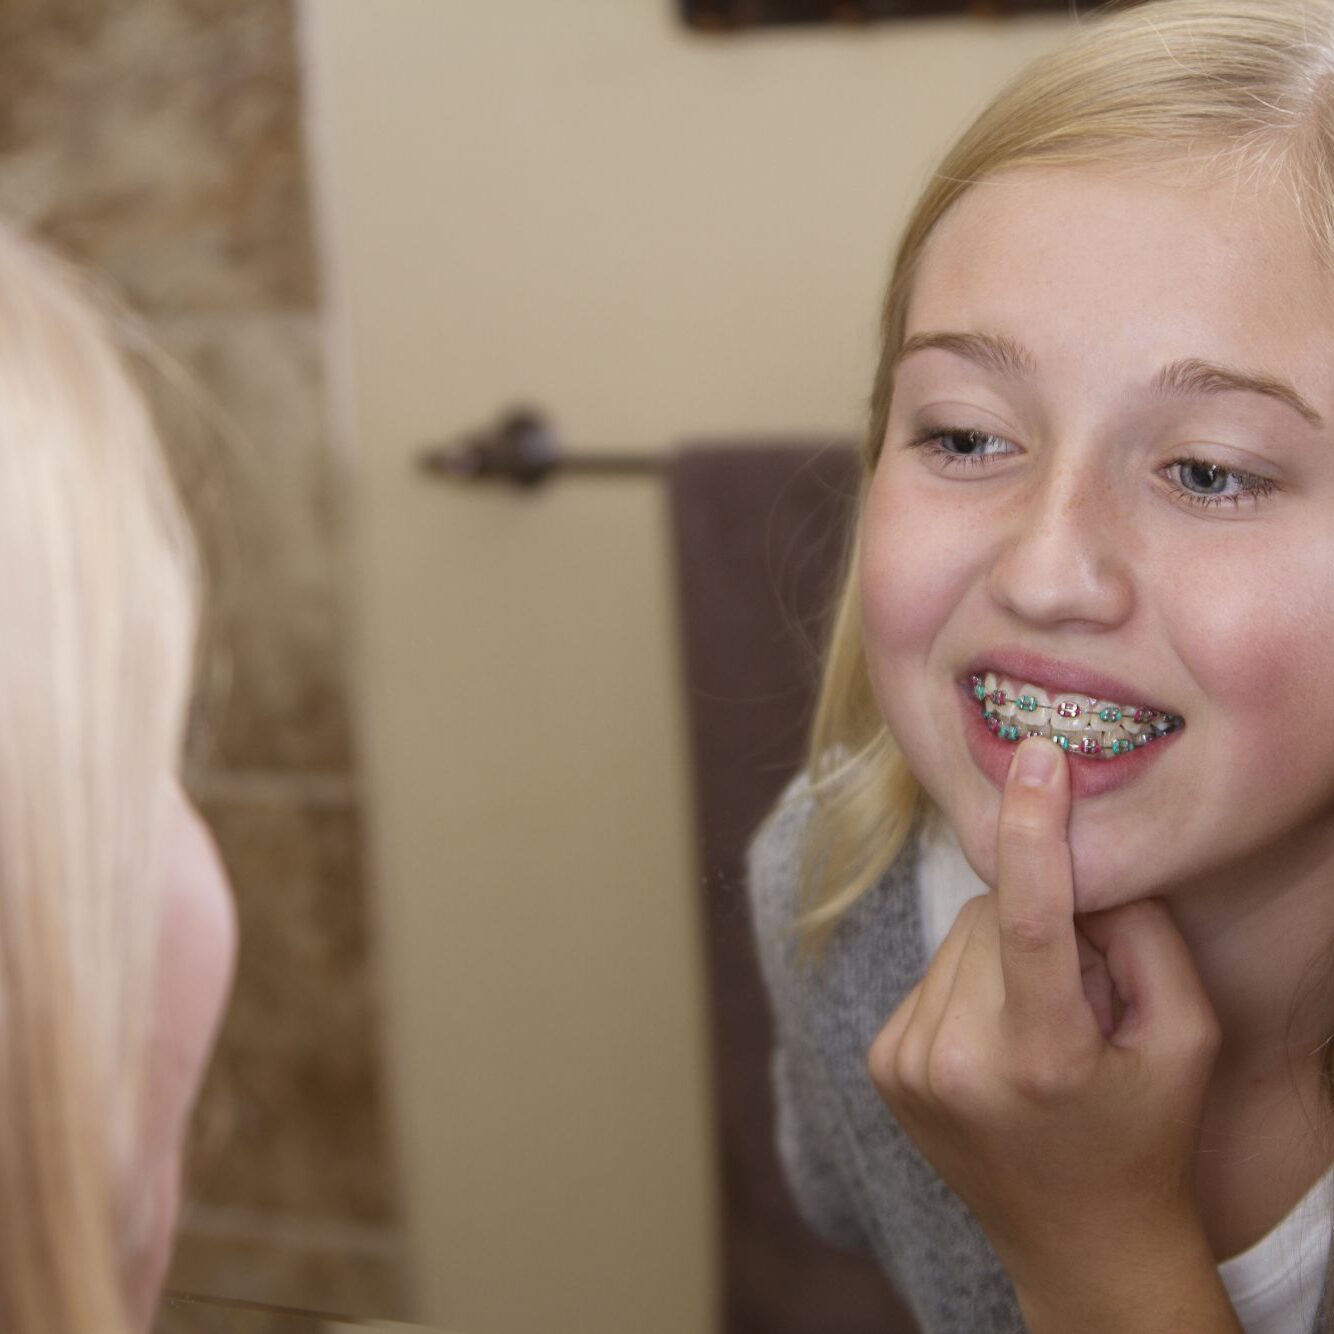 Girl with braces looking in mirror